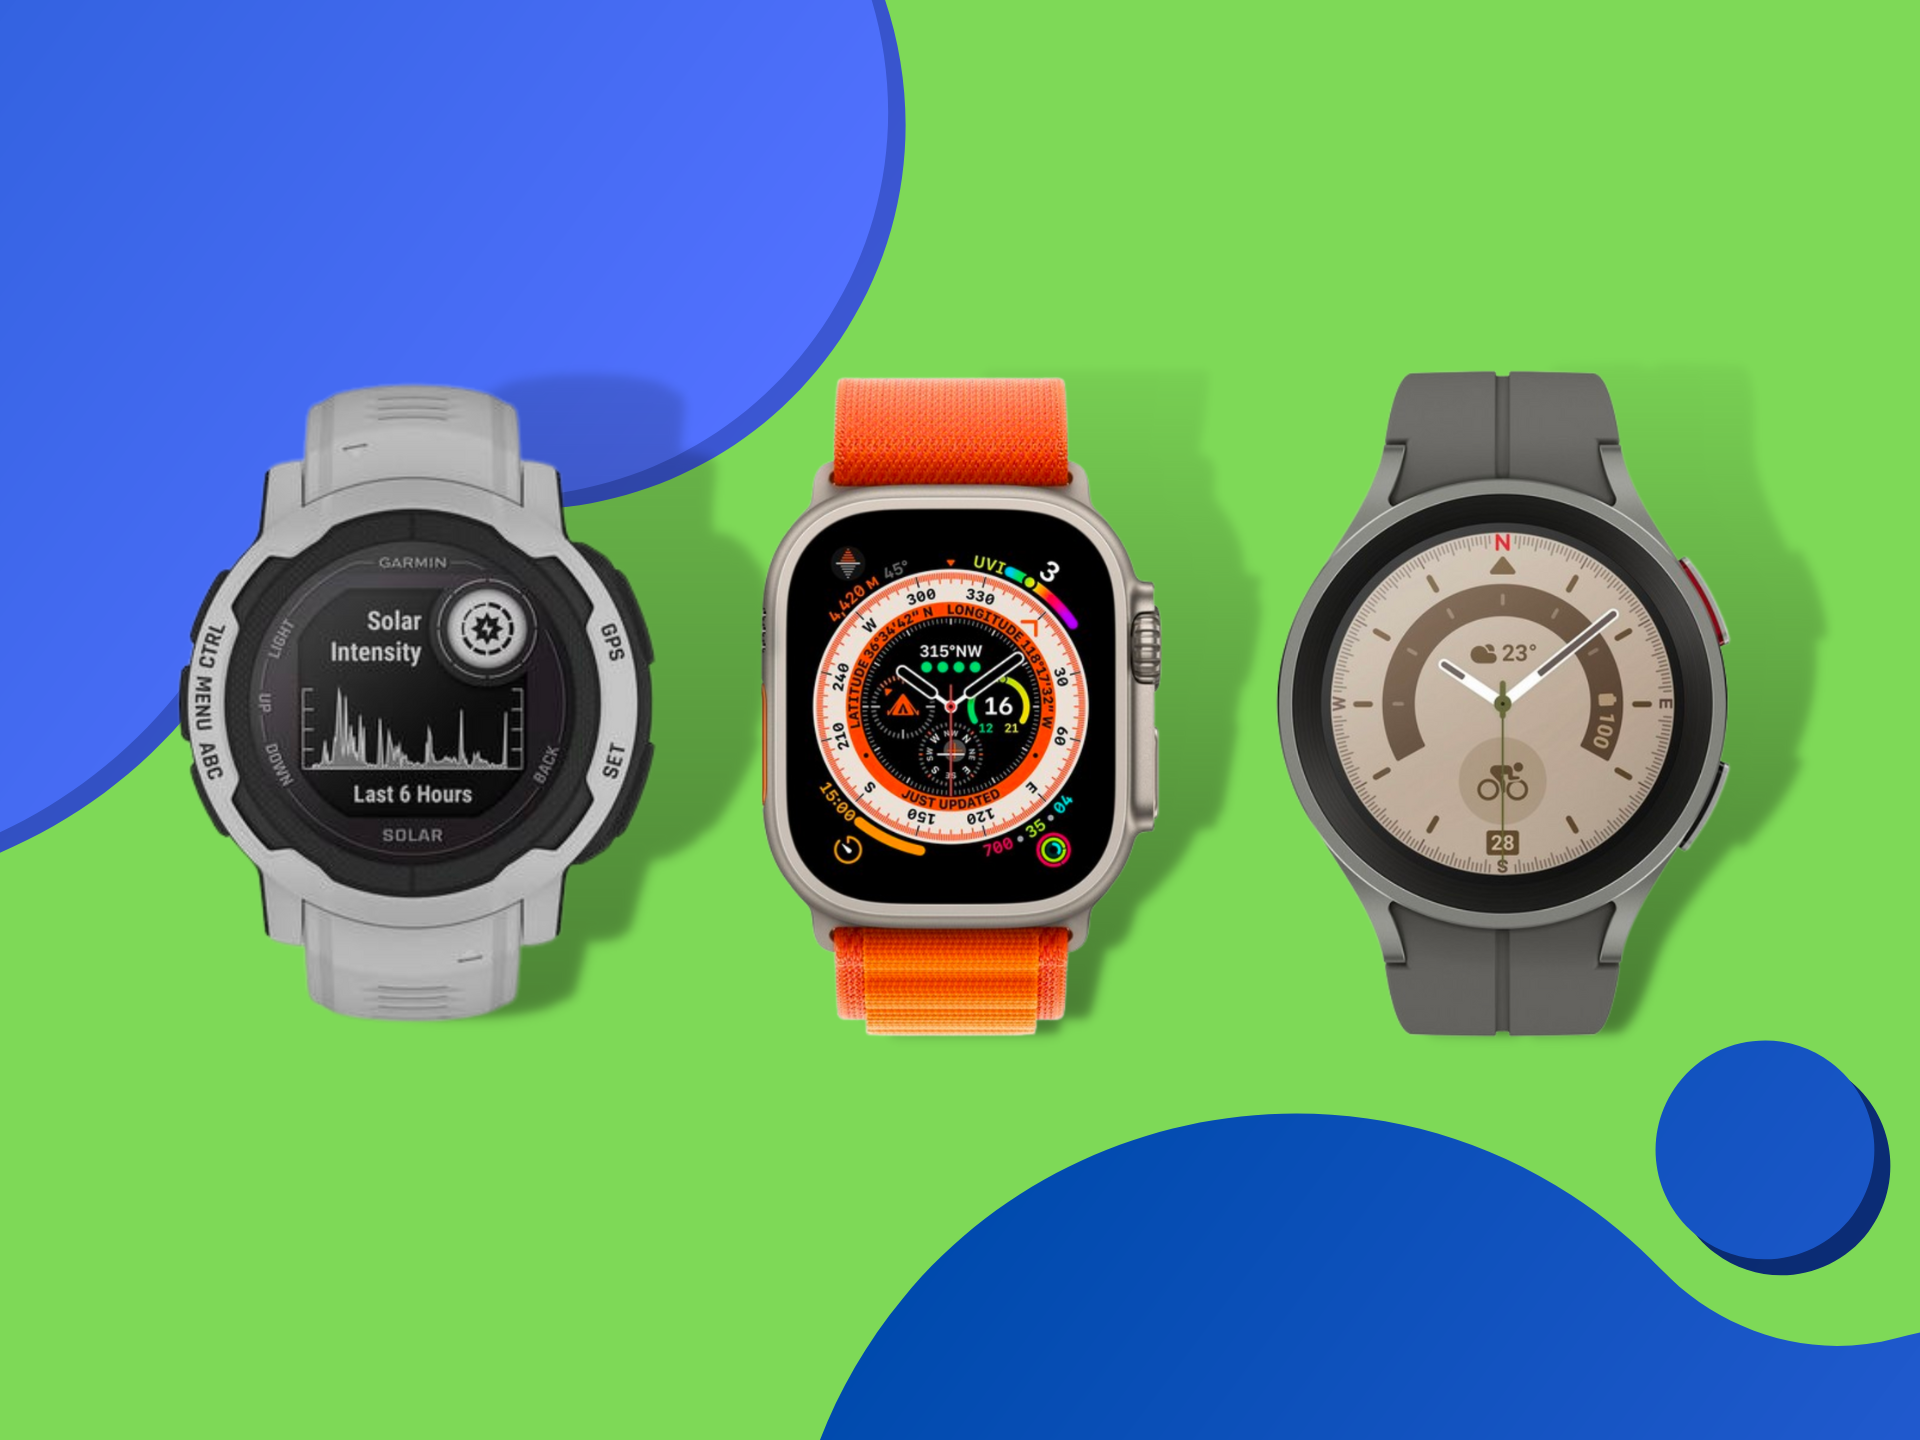 Suri sundhed Sæt ud These are the best smartwatches in 2022